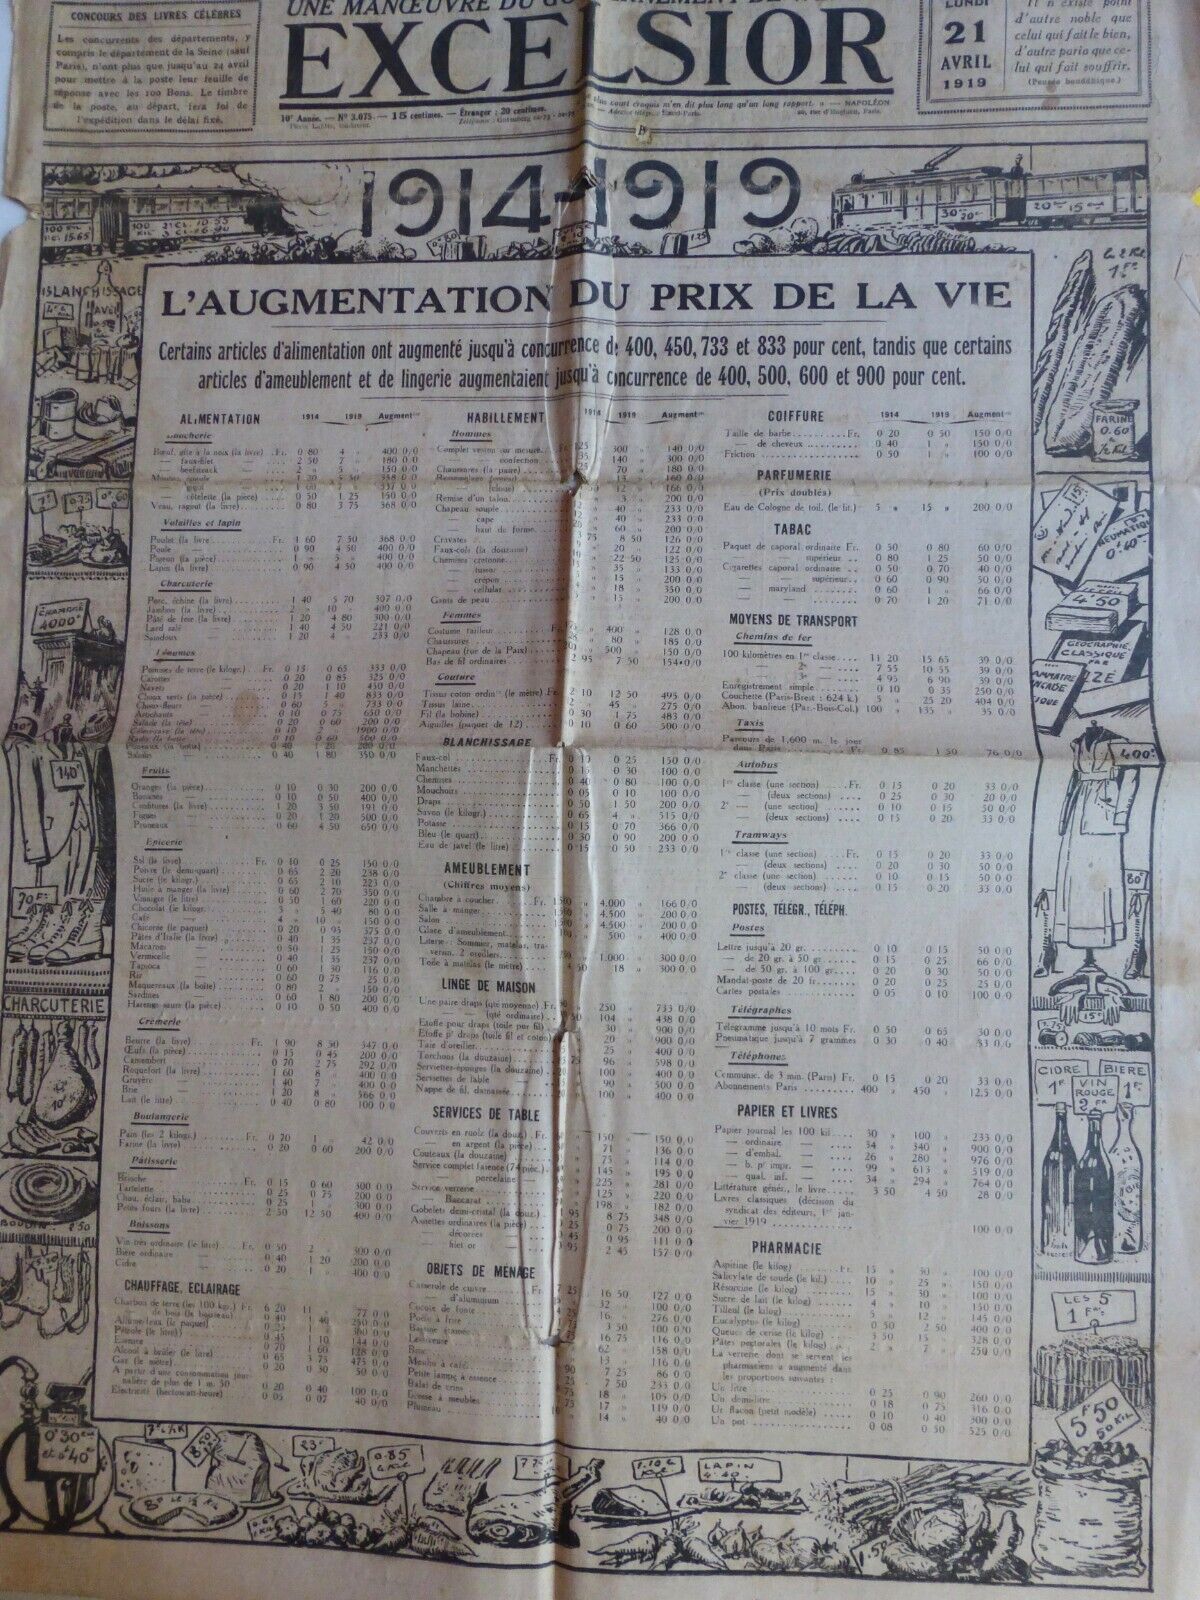 1915 1919 LIFE DEAR INFLATION INCREASE 8 OLD NEWSPAPERS